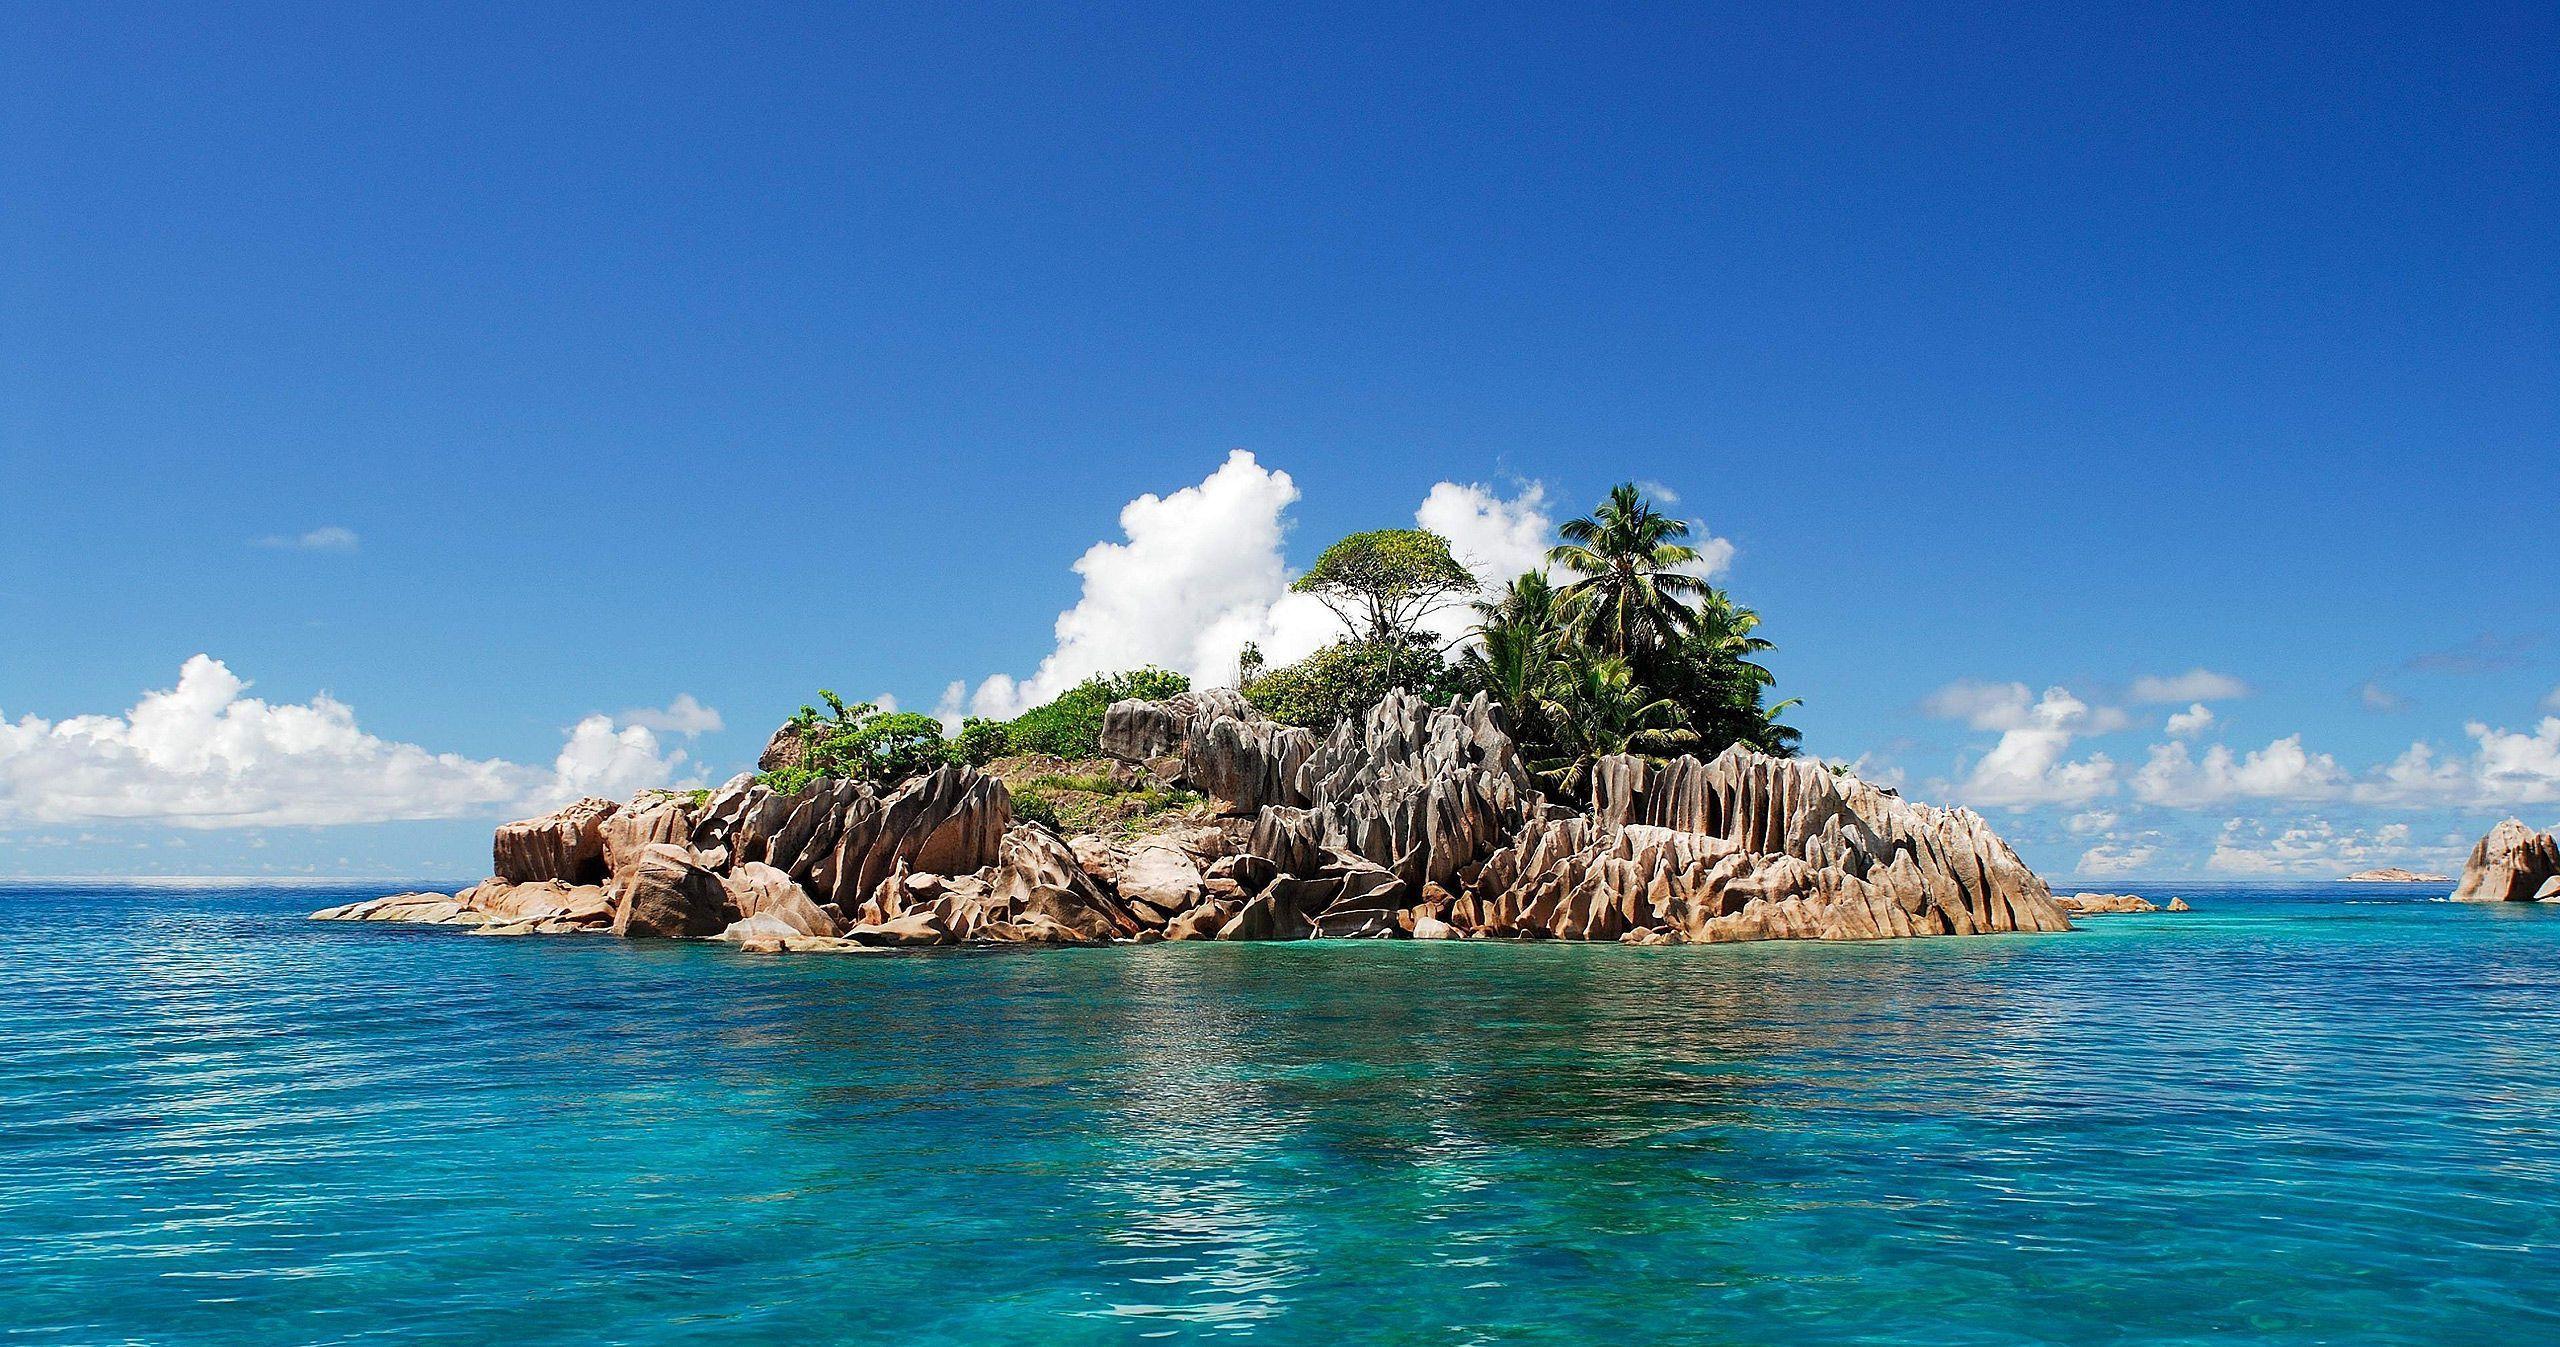 Private Island Wallpapers - Top Free Private Island Backgrounds